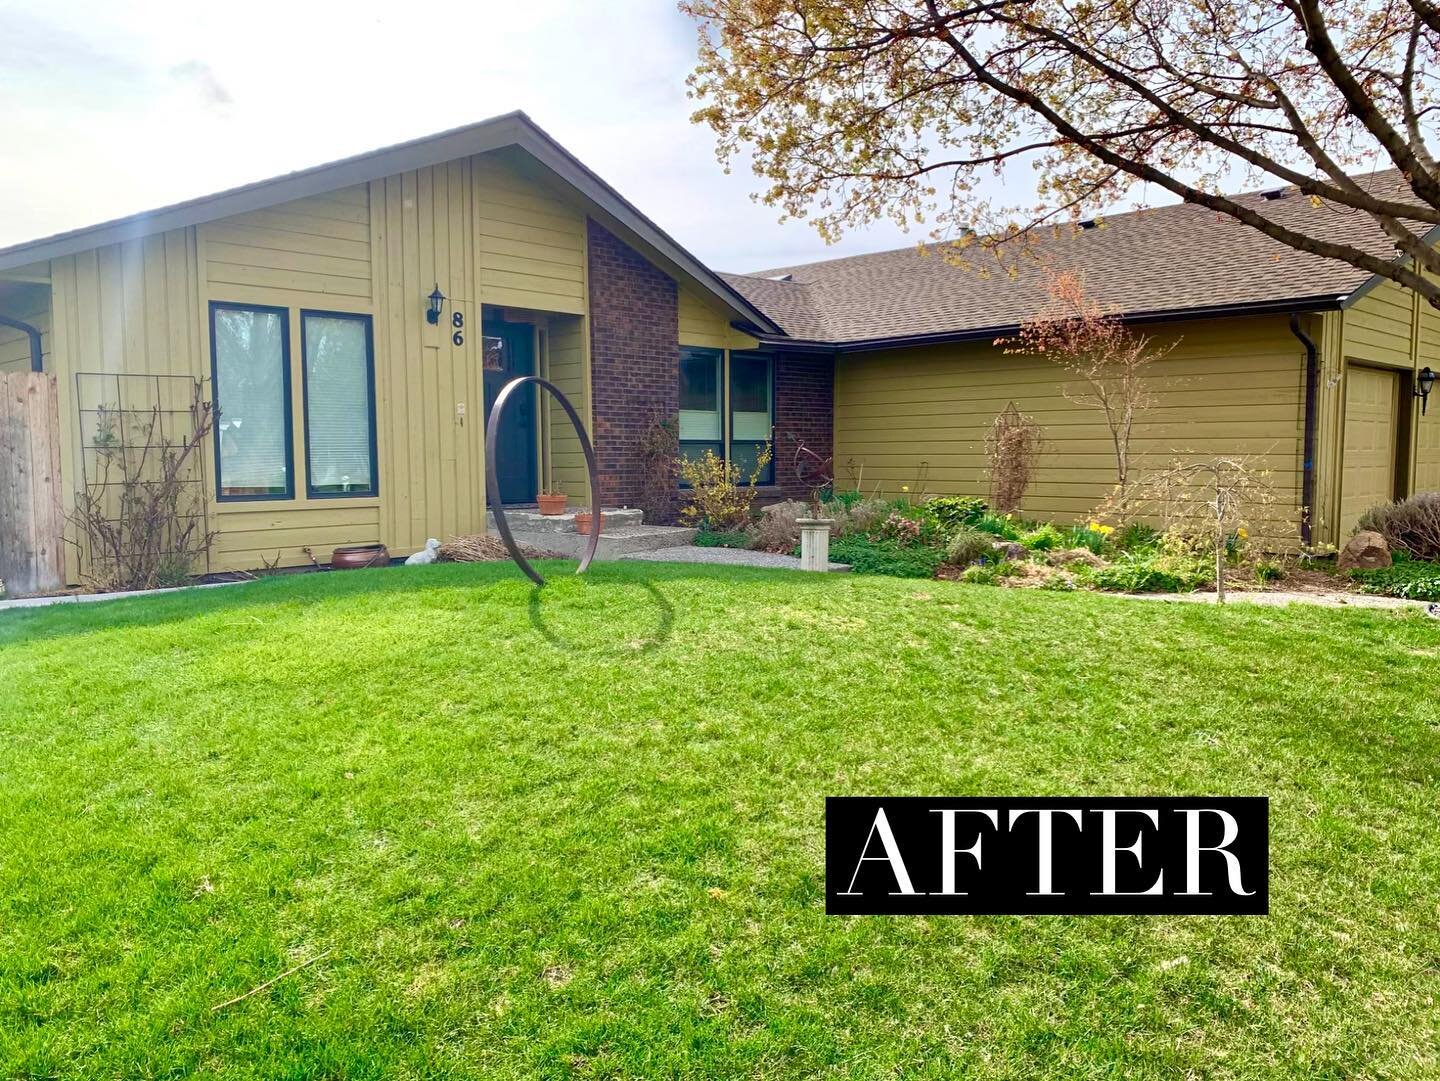 New doors, windows, paint and updated patio just in time for summer ☀️ 

#websterconstruction #paint #patio #doors #windows #summertime #projects #idahome #idahobuilder #nampa